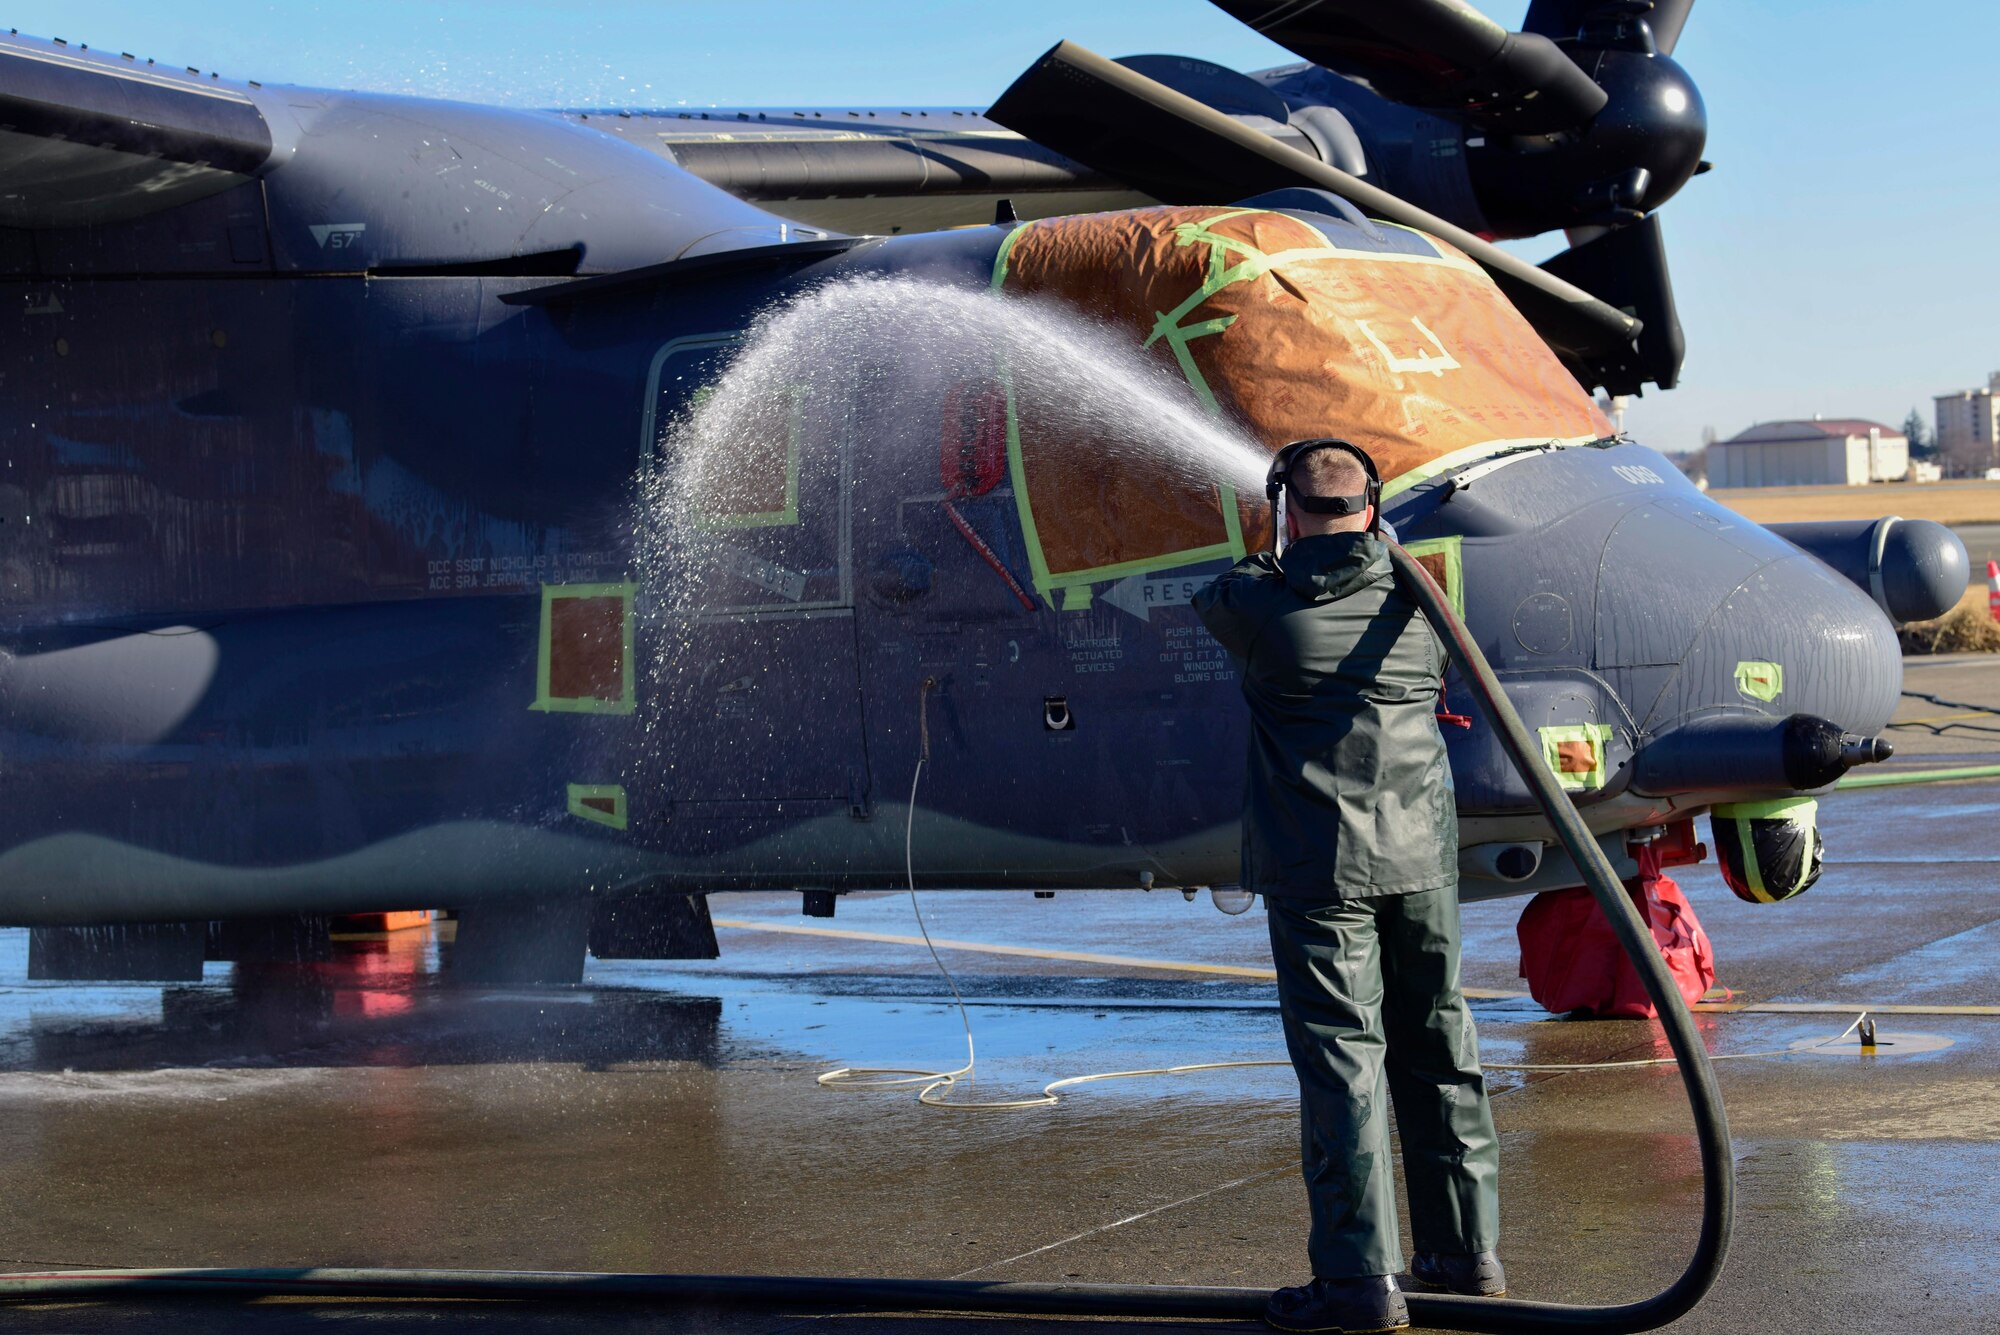 Senior Airman Brody Lee, 753rd Special Operations Aircraft Maintenance Squadron crew chief, cleans a side of a CV-22 Osprey assigned to the 21st Special Operations Squadron